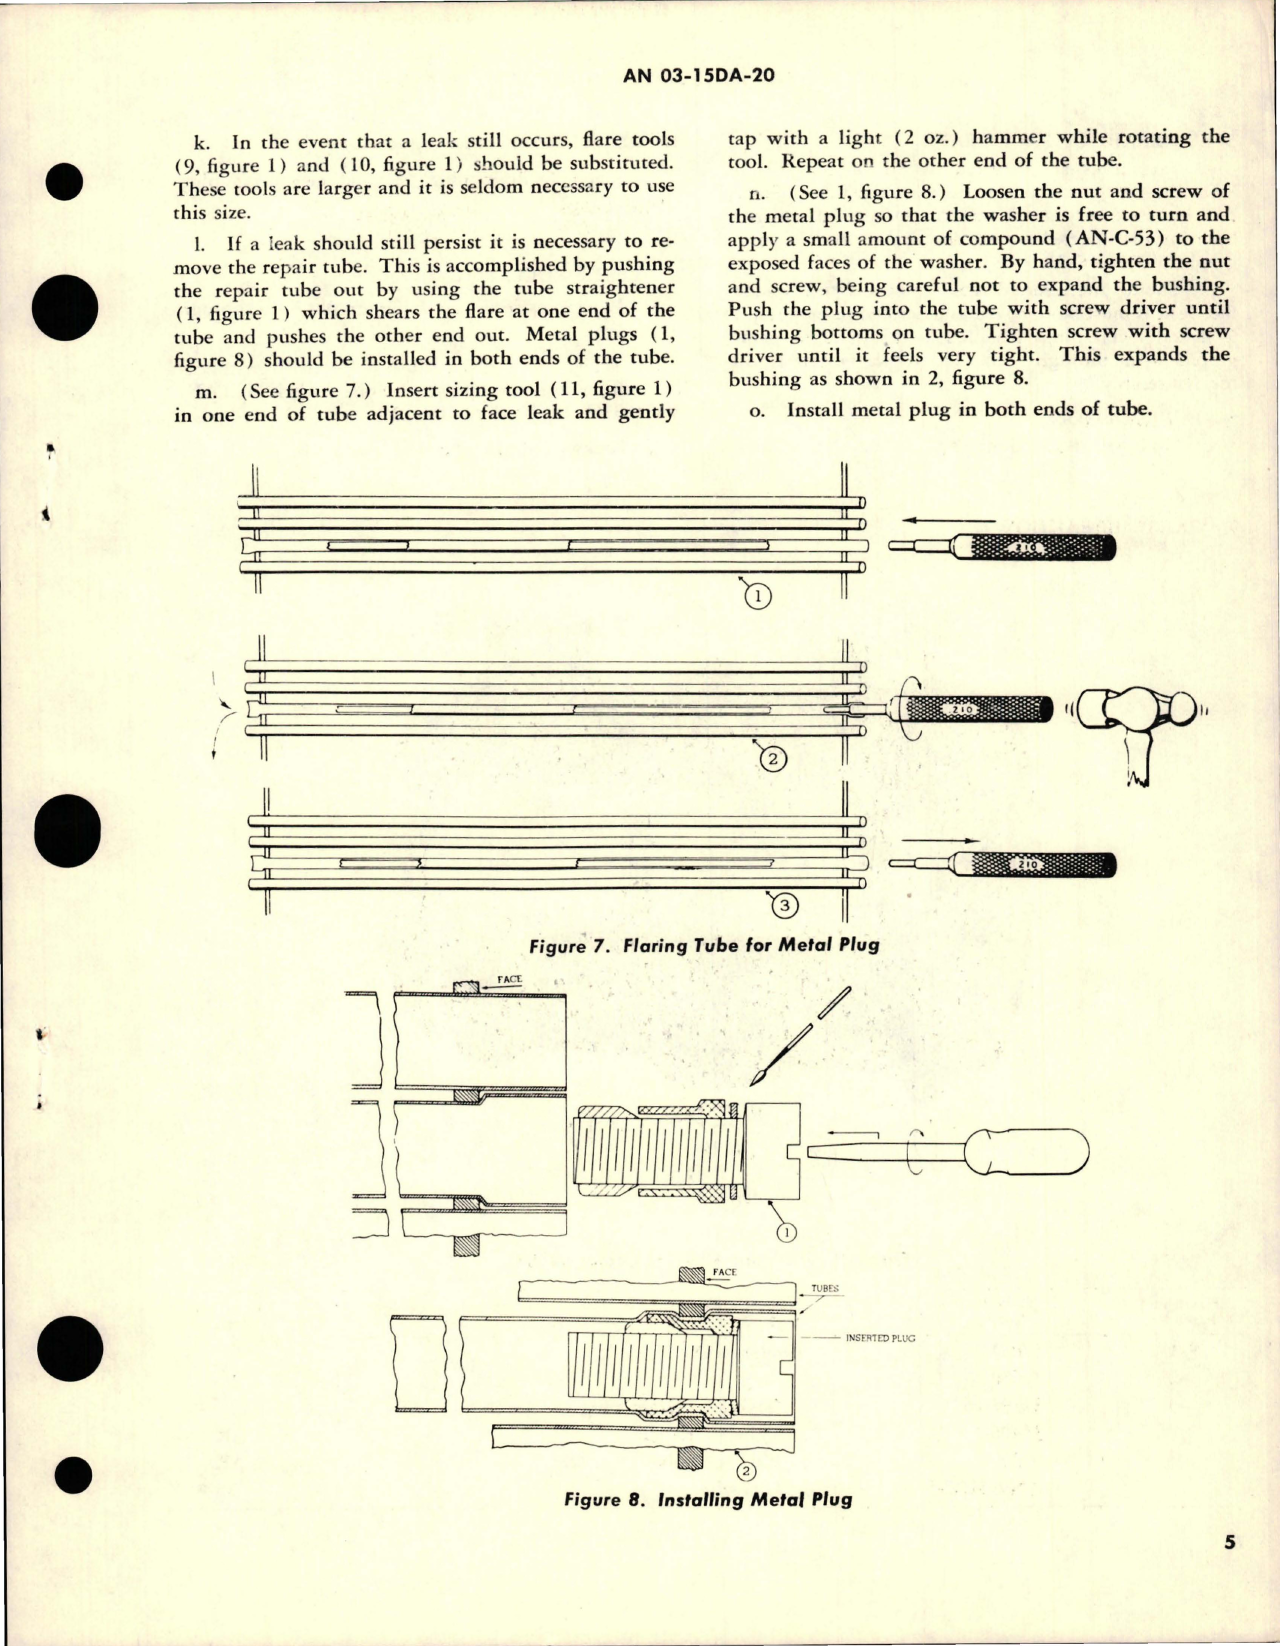 Sample page 5 from AirCorps Library document: Overhaul Instructions with Parts for Oil Cooler - Part 52087 